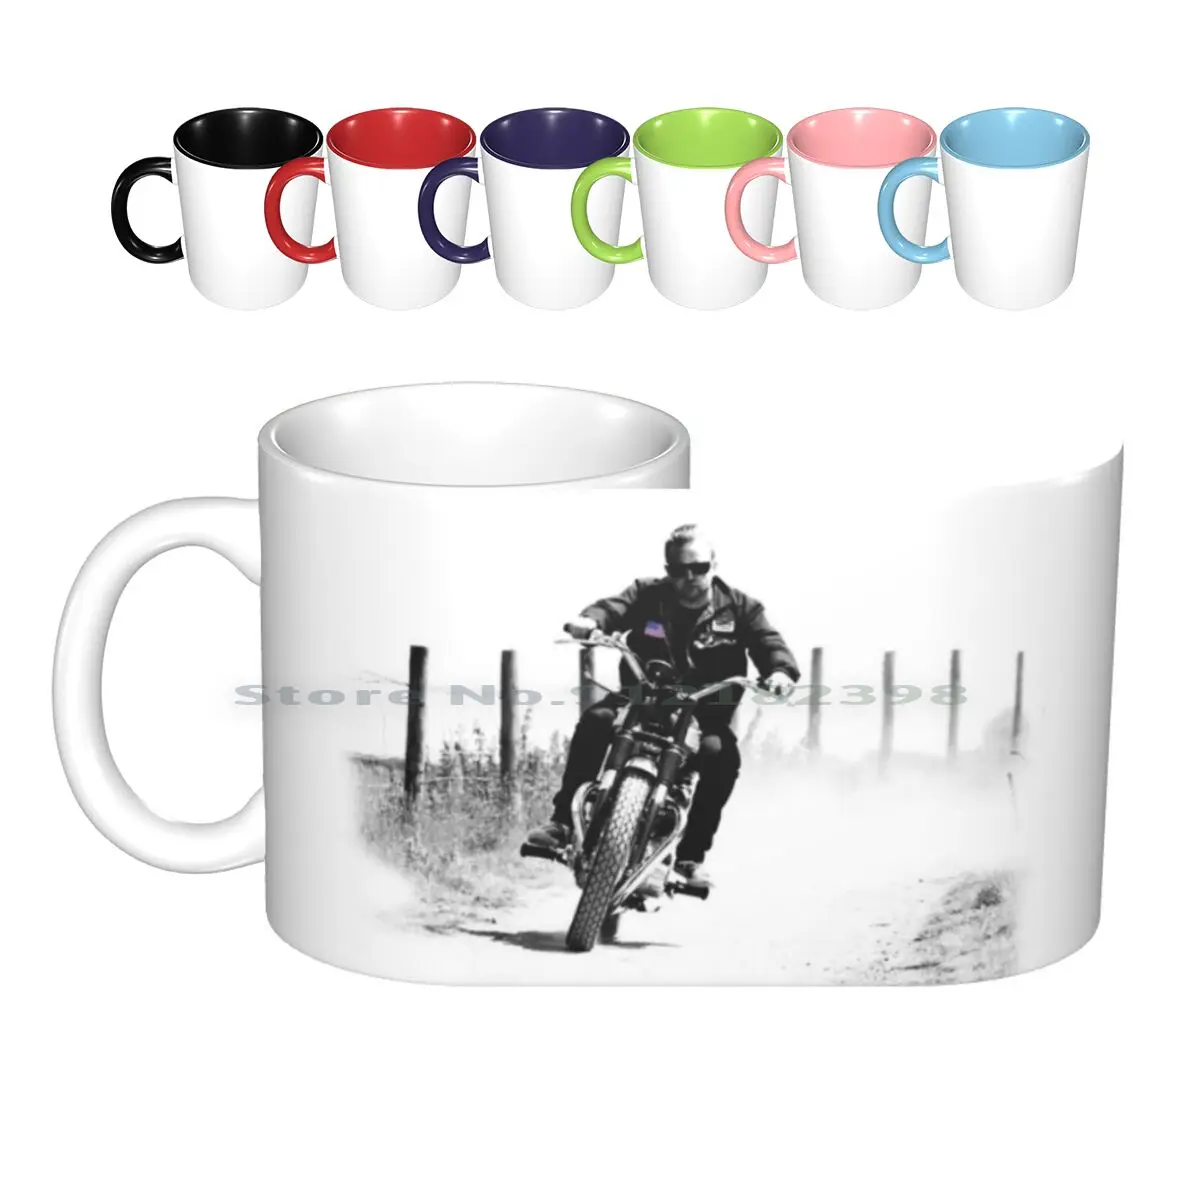 

Two Wheels Move The Soul Ceramic Mugs Coffee Cups Milk Tea Mug Two Wheels Move The Soul Motorcycle Motorcycle Vintage Retro